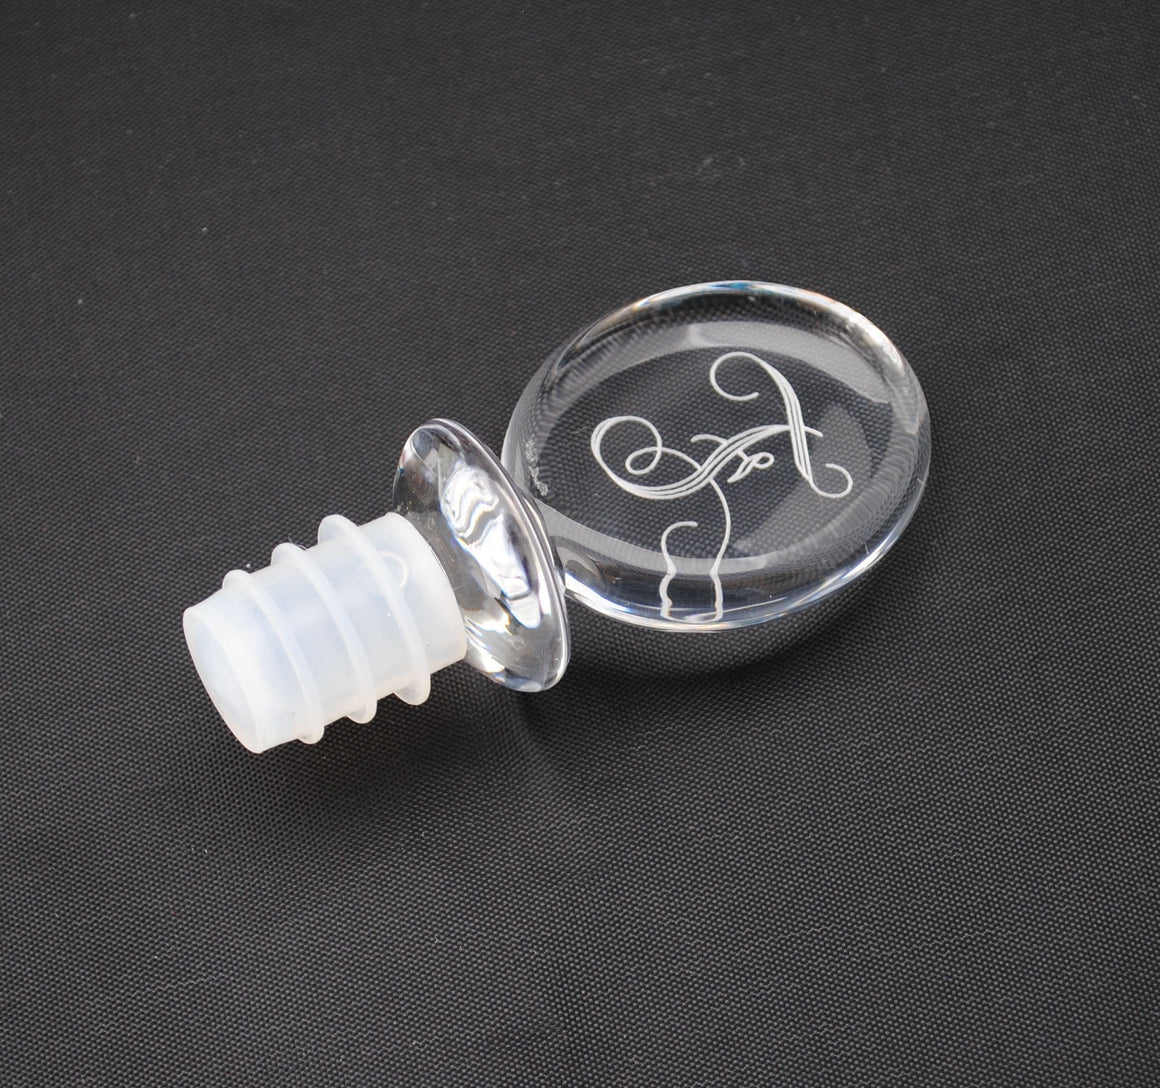 Monogrammed personalized Clear Acrylic Lucite Wine Bottle Stopper cork barware accessory hostess gift stocking stuffer